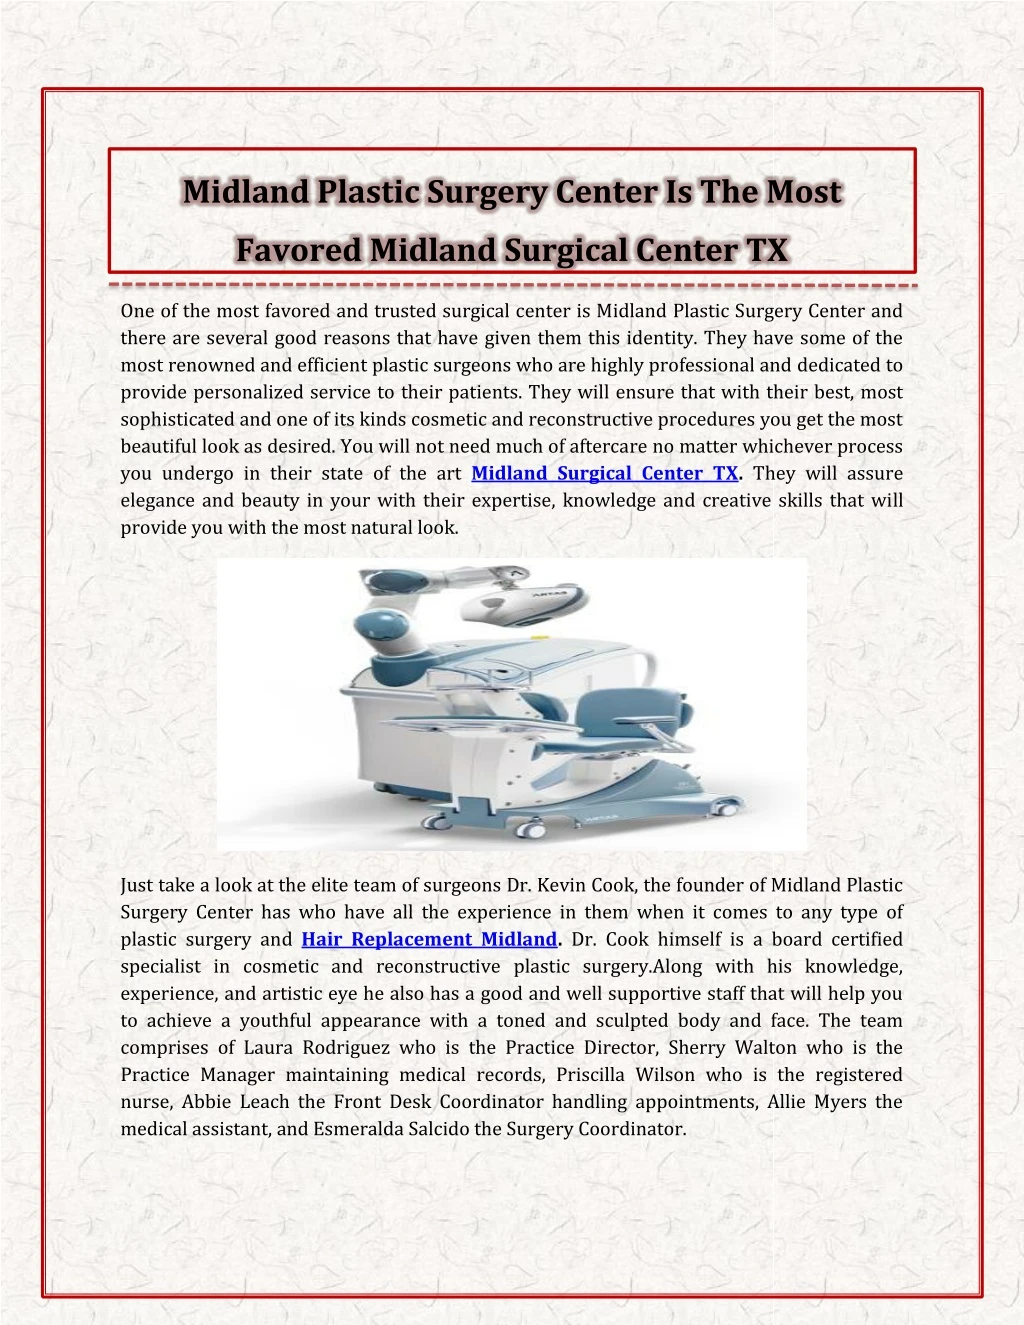 midland plastic surgery center is the most